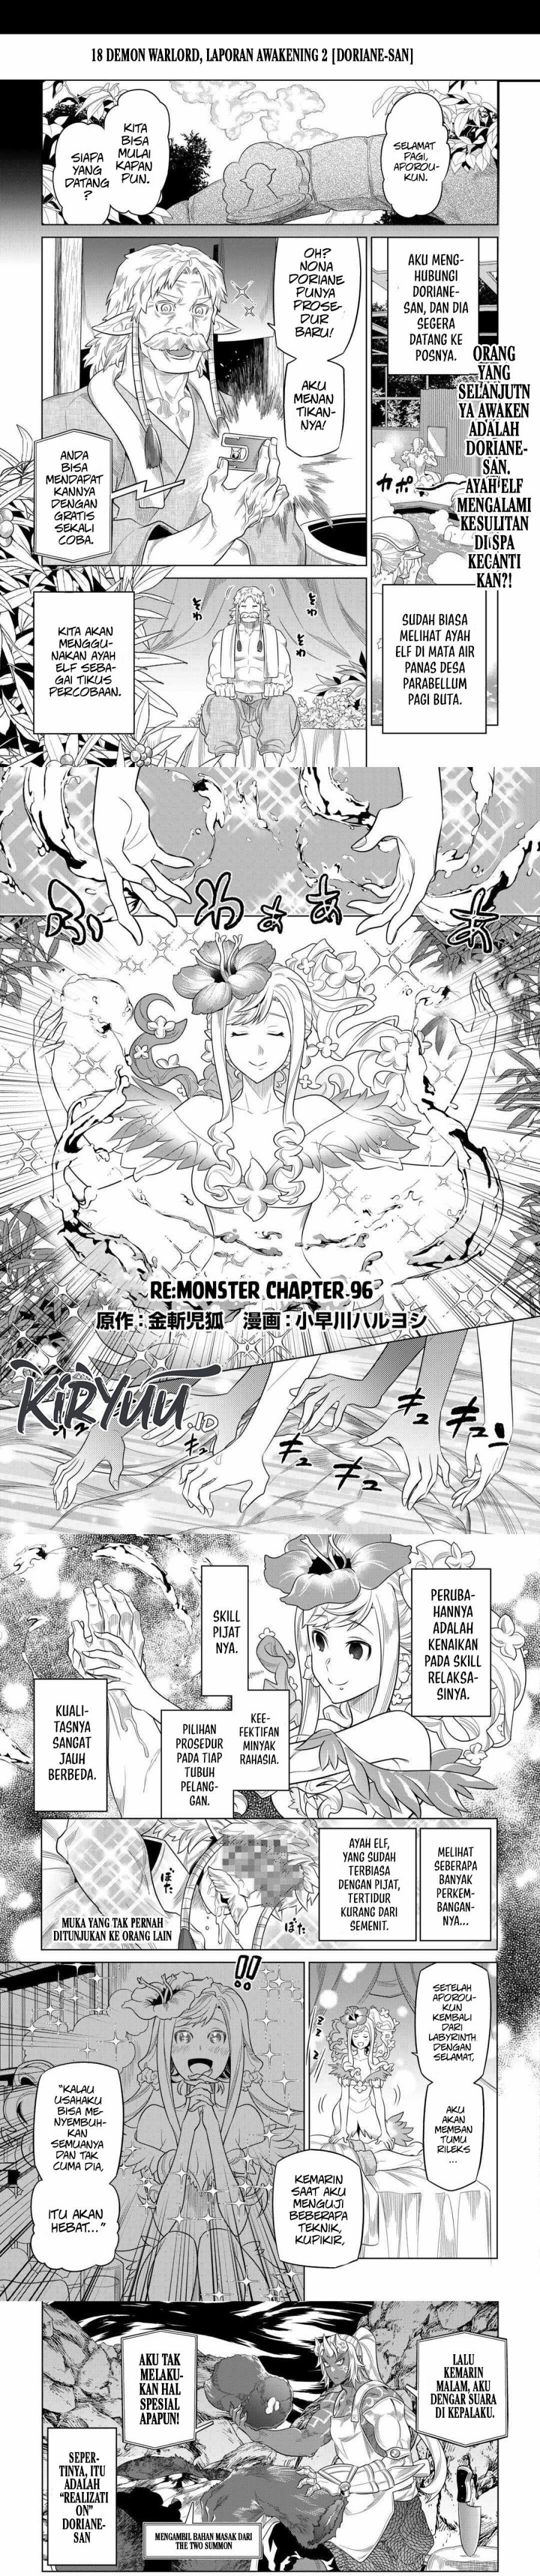 Re:monster Chapter 96 - 33